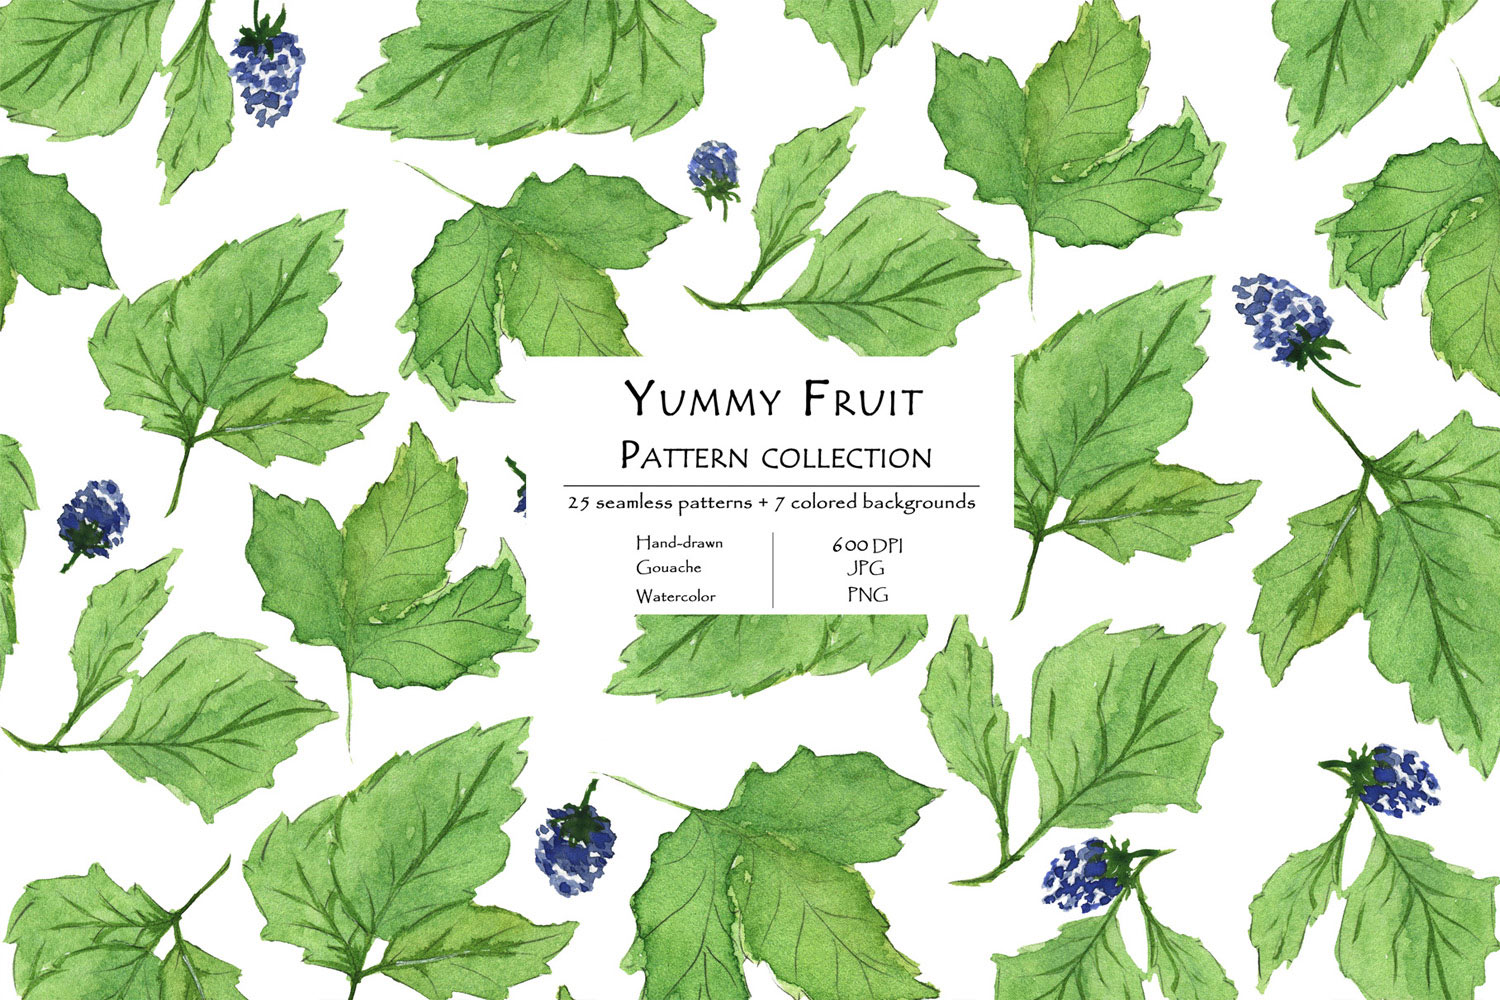 Yummy Fruit Pattern Collection With 25 Seamless Patterns And 7 Backgrounds Leaves Example.